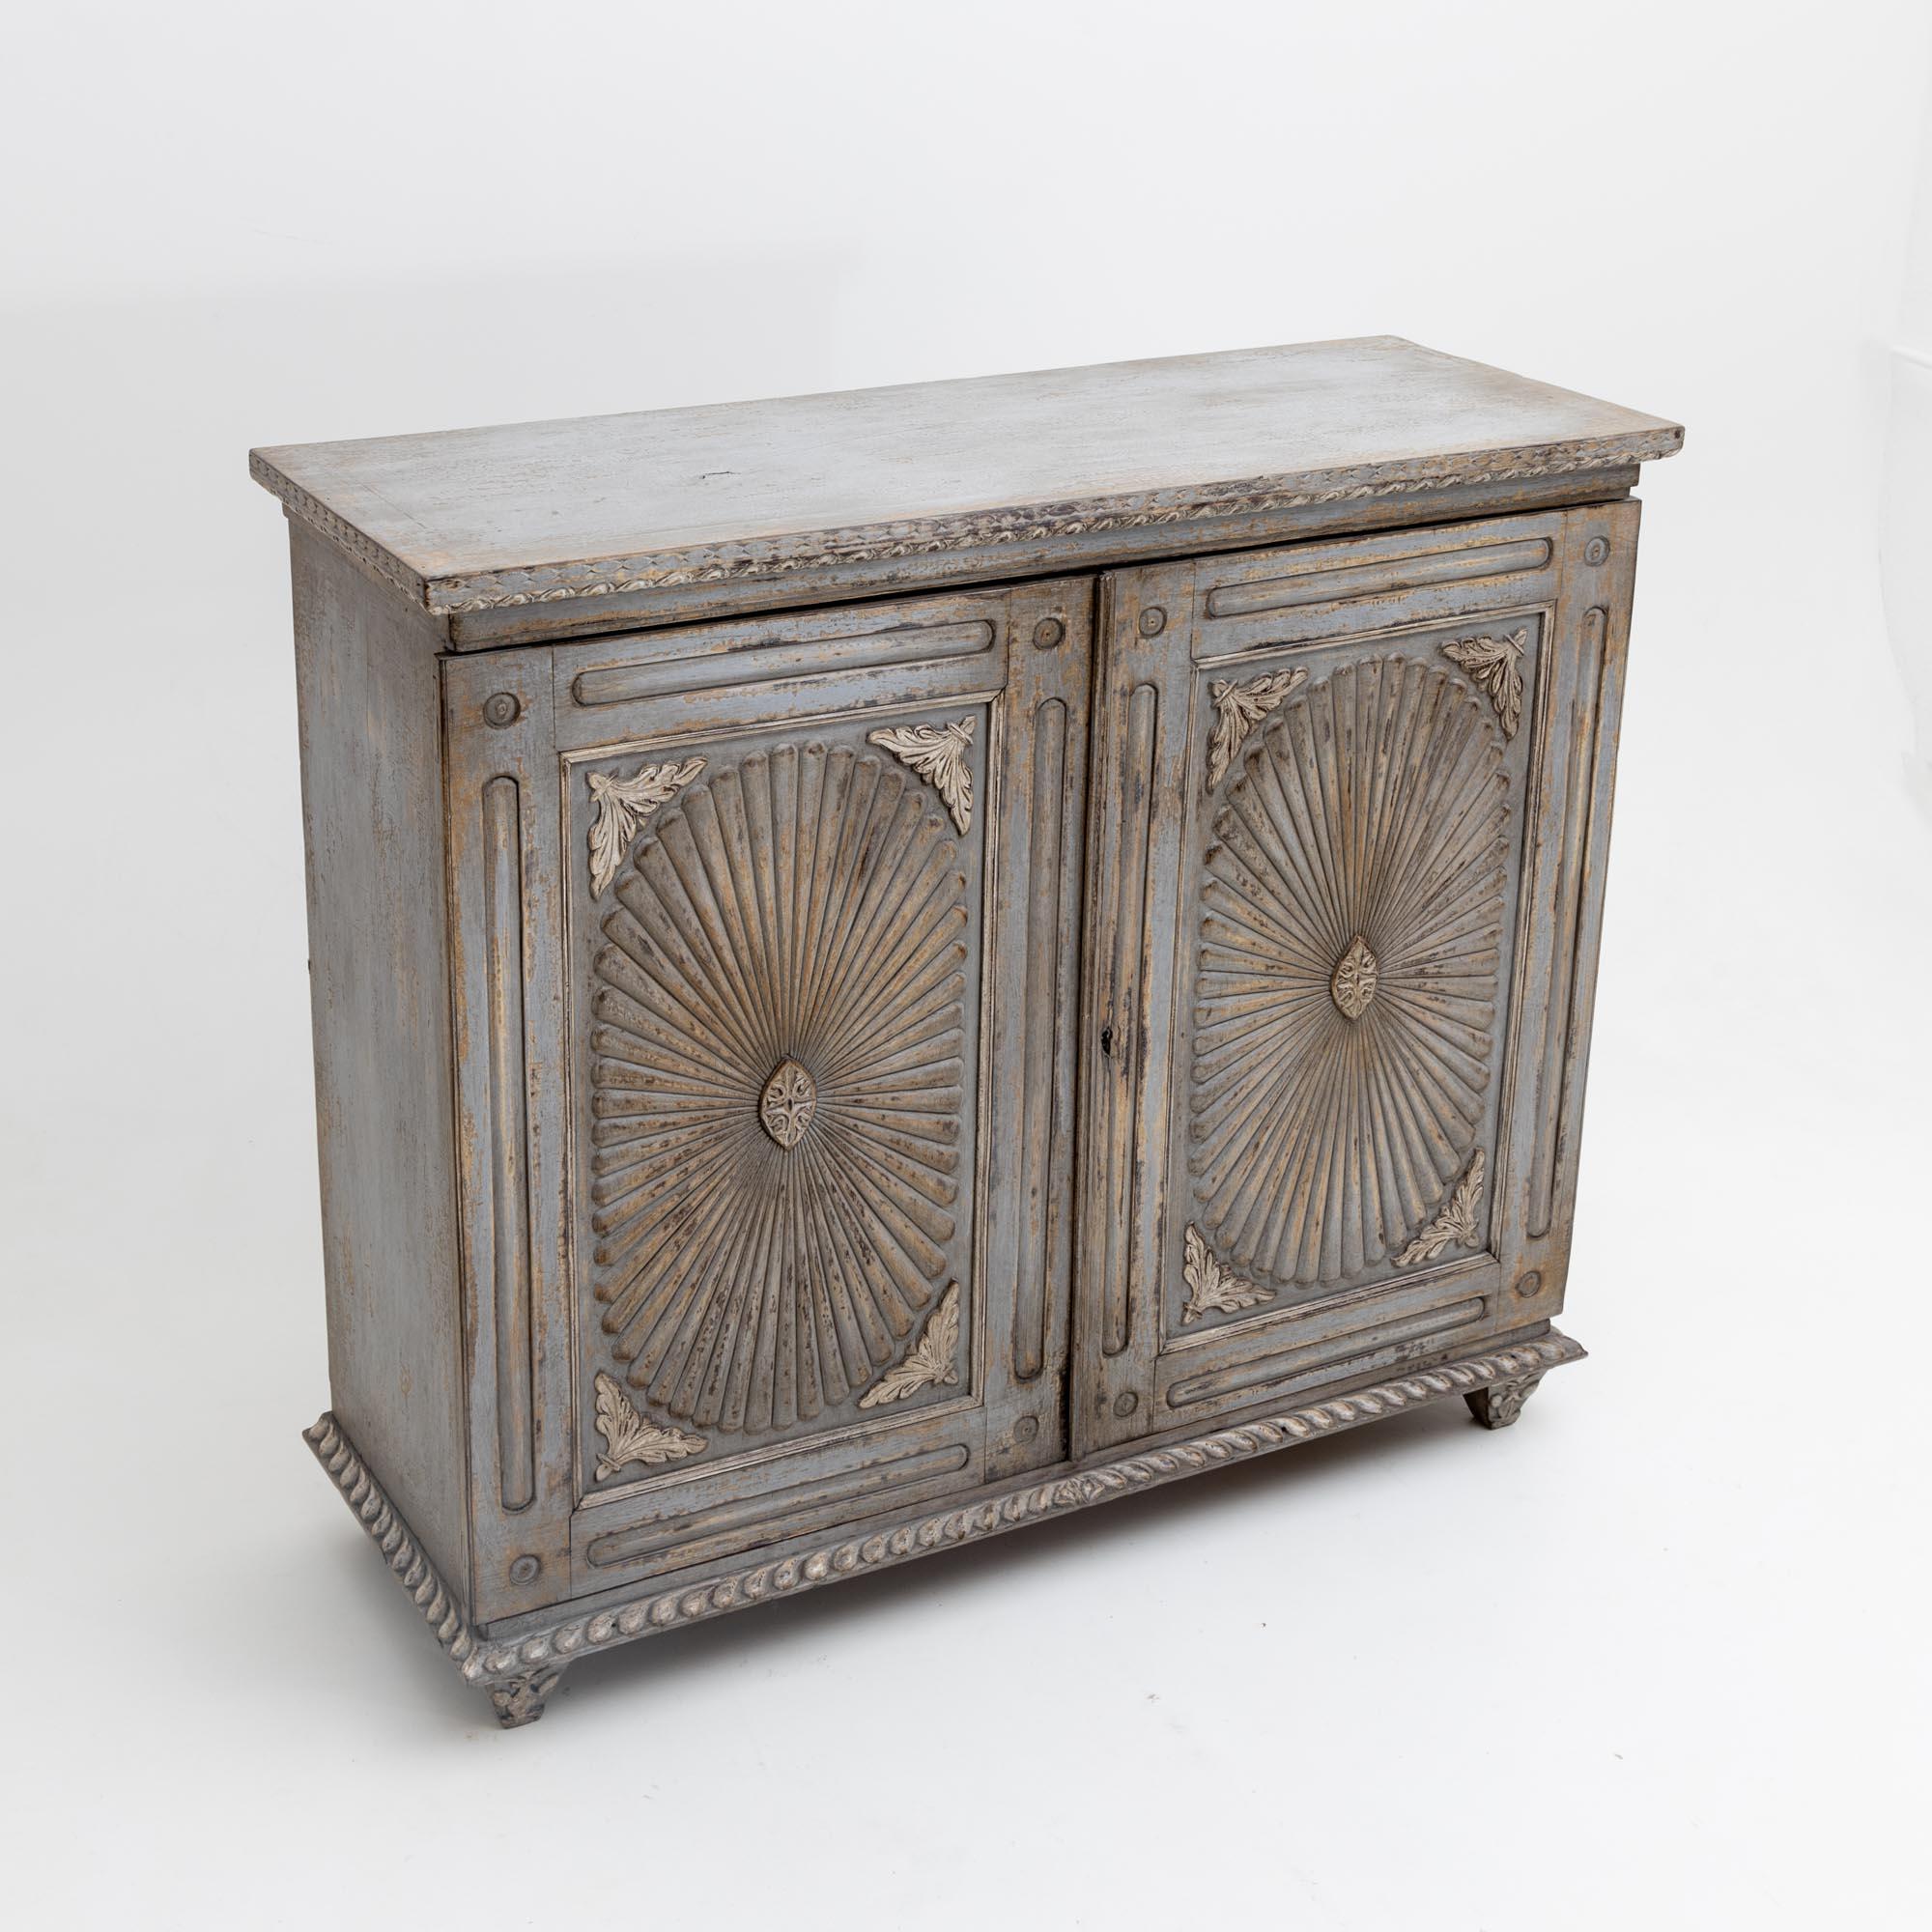 Two-door Indian sideboard with carved decorations on the doors and as surrounding friezes on the base and top plate. The grey frame is new and has been decoratively patinated.